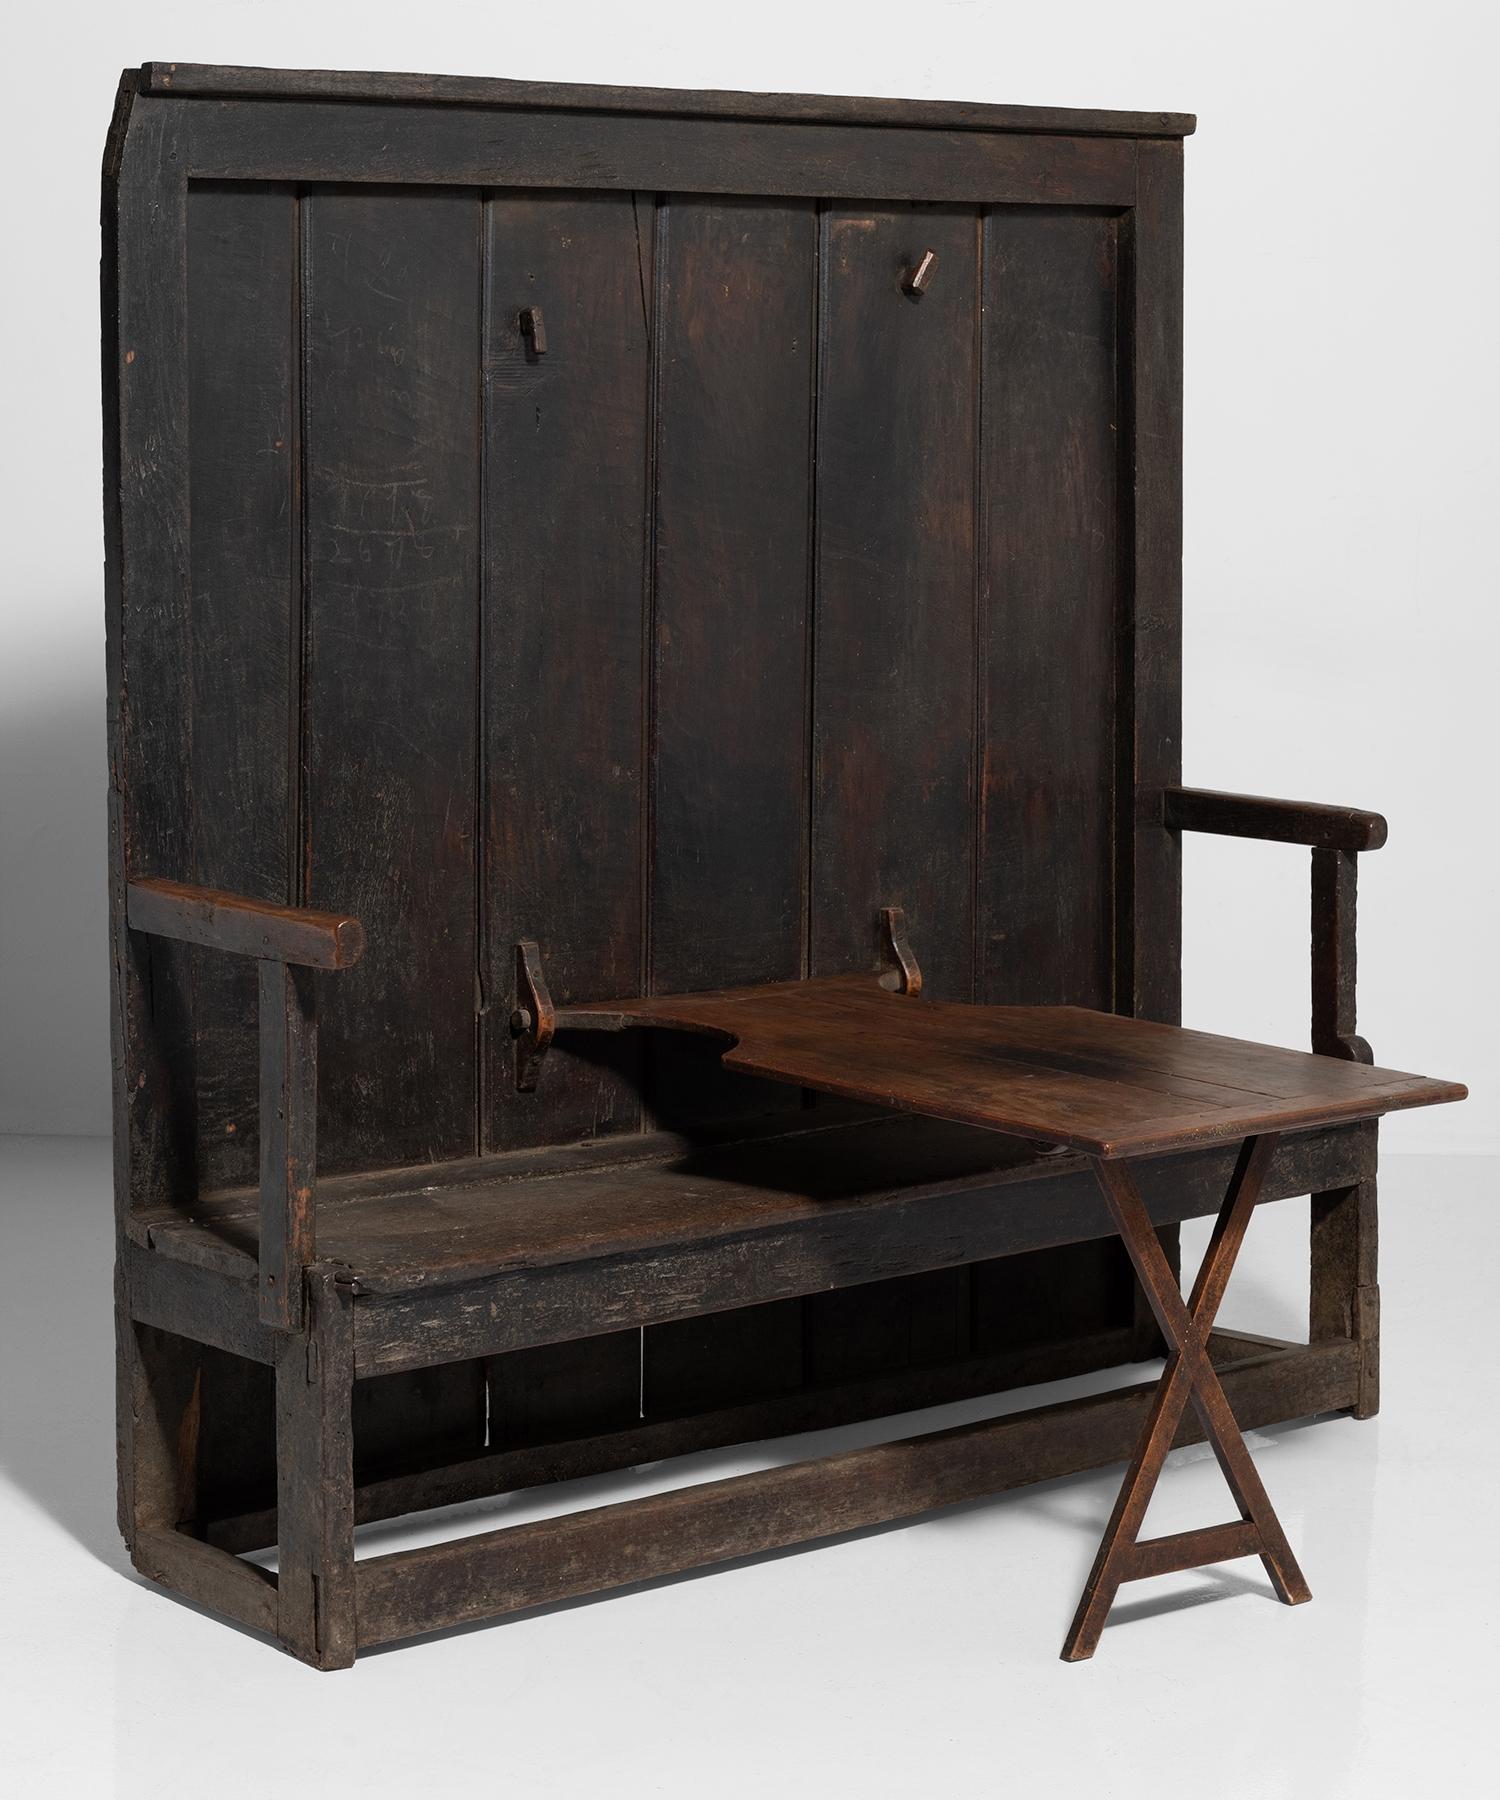 Tavern settle with table, England, 19th century.

Unique settle with folding table.

Measures: 67.5” W x 21” D x 70” H x 17” seat / 22.75” W x 40” D x 25” H (table).